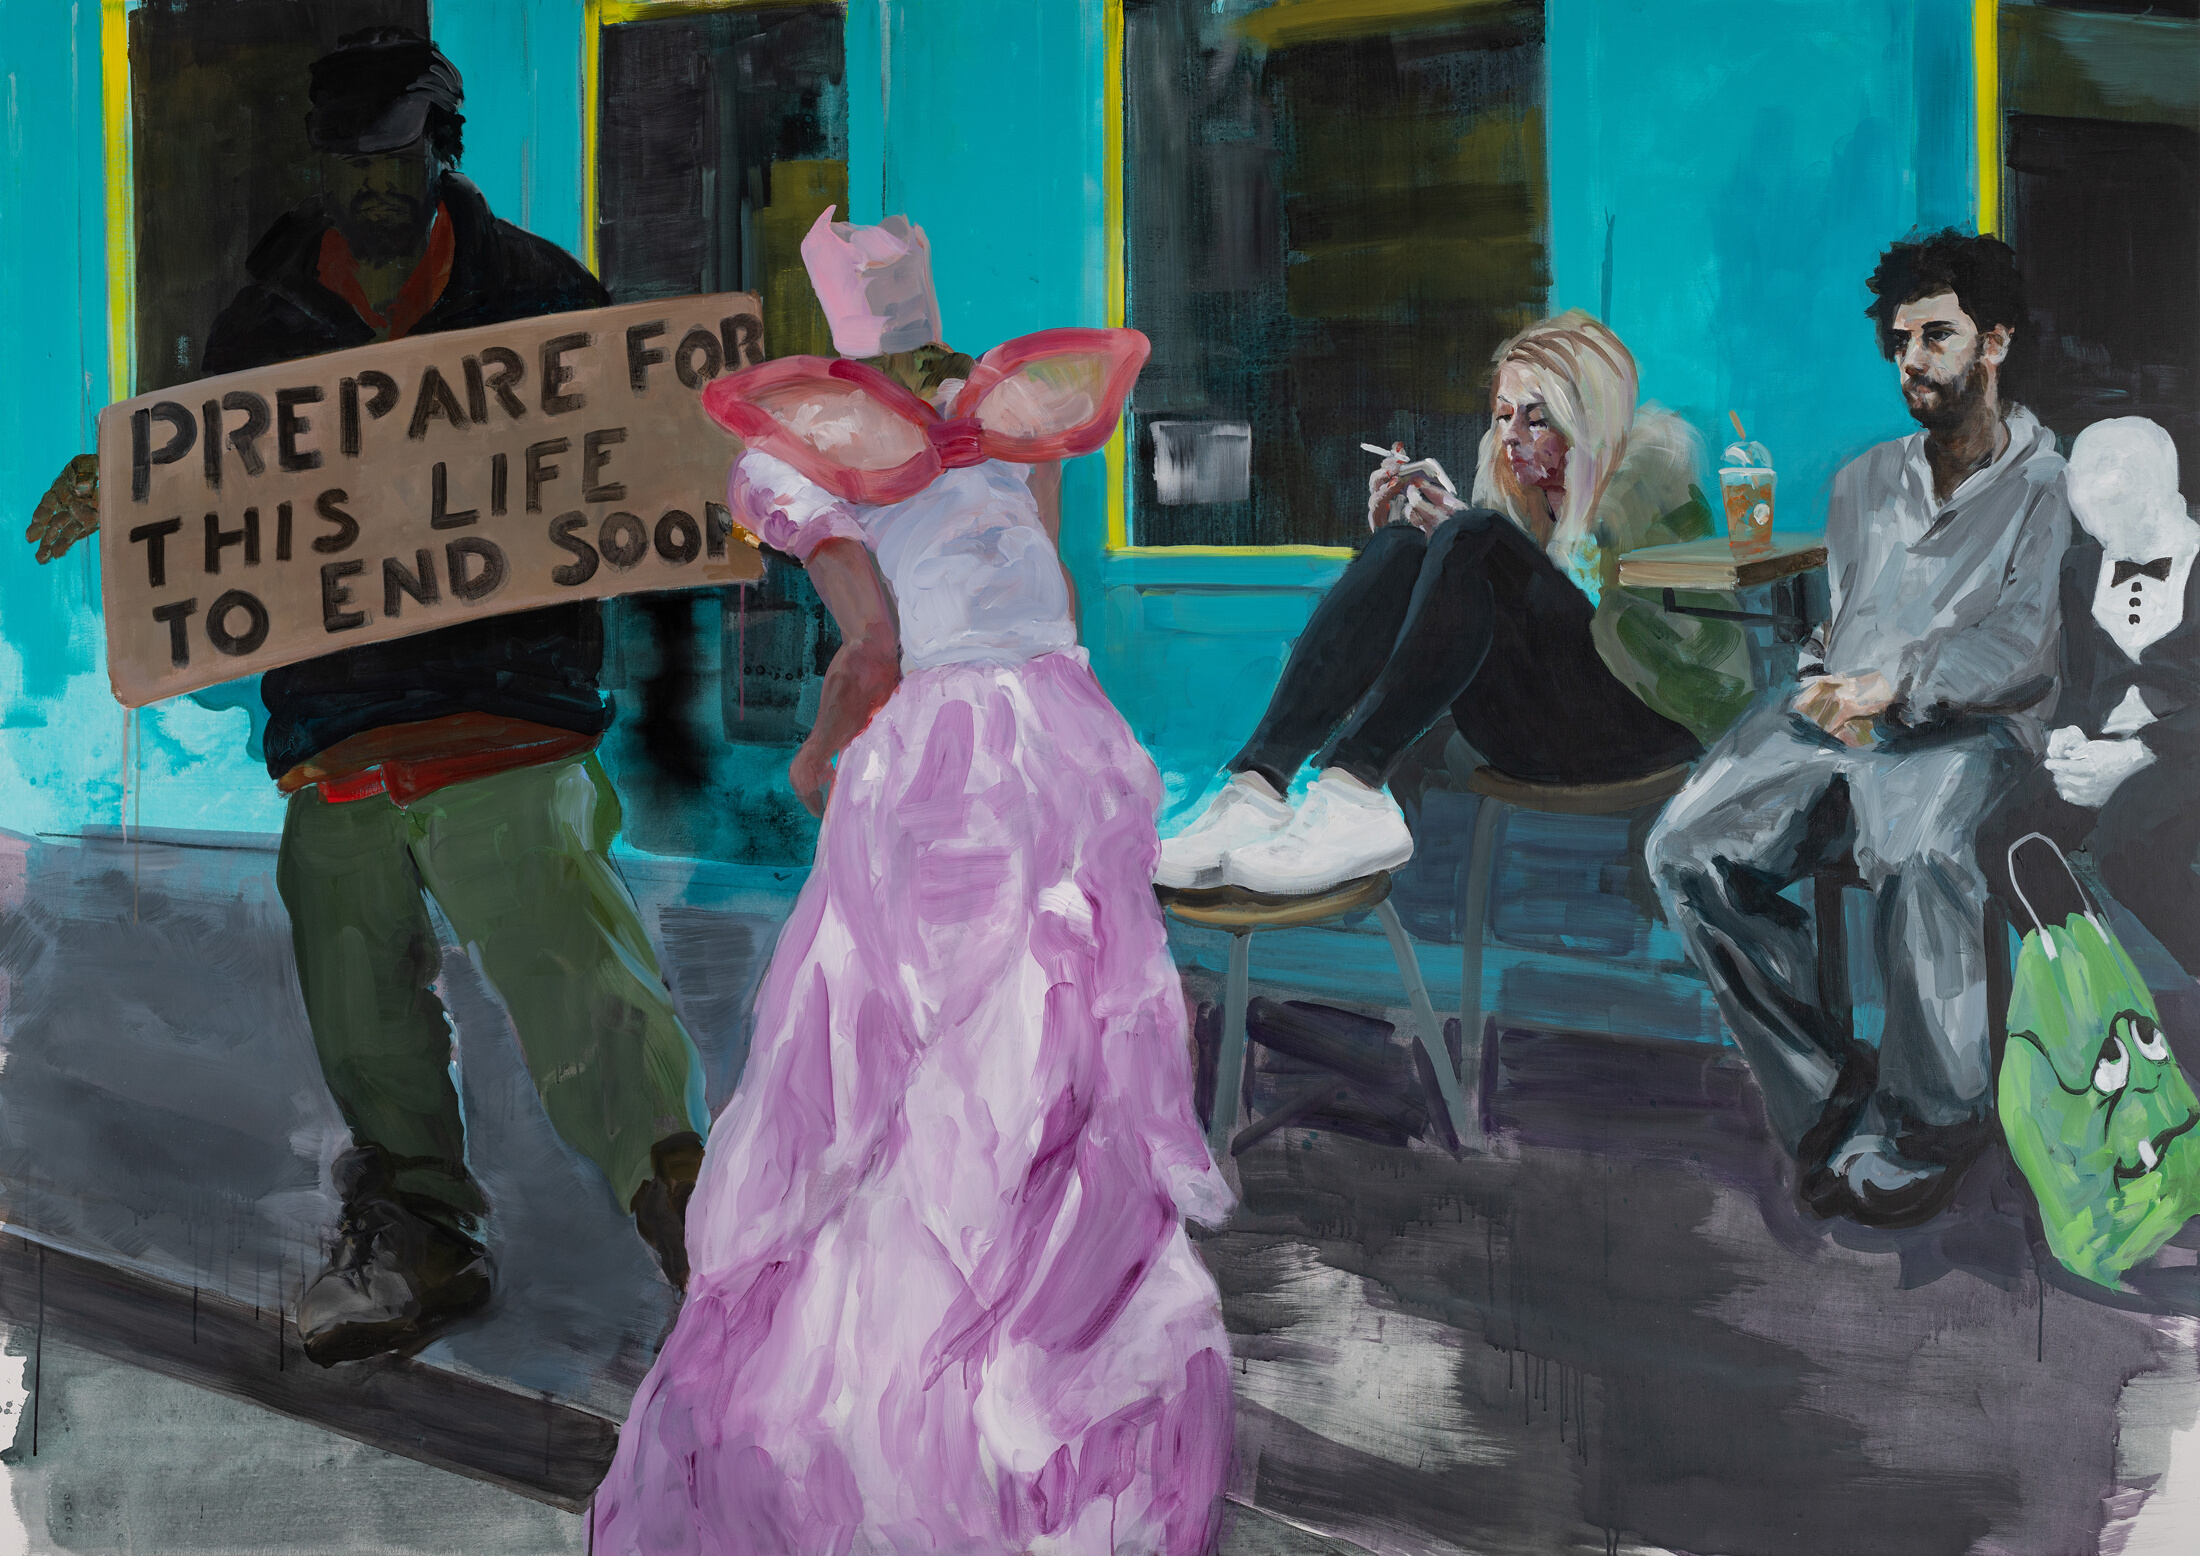 Eric Fischl "Sign of the Times" 2022, acrylic on linen, 68 x 96 inches, 172.7 x 243.8 cm